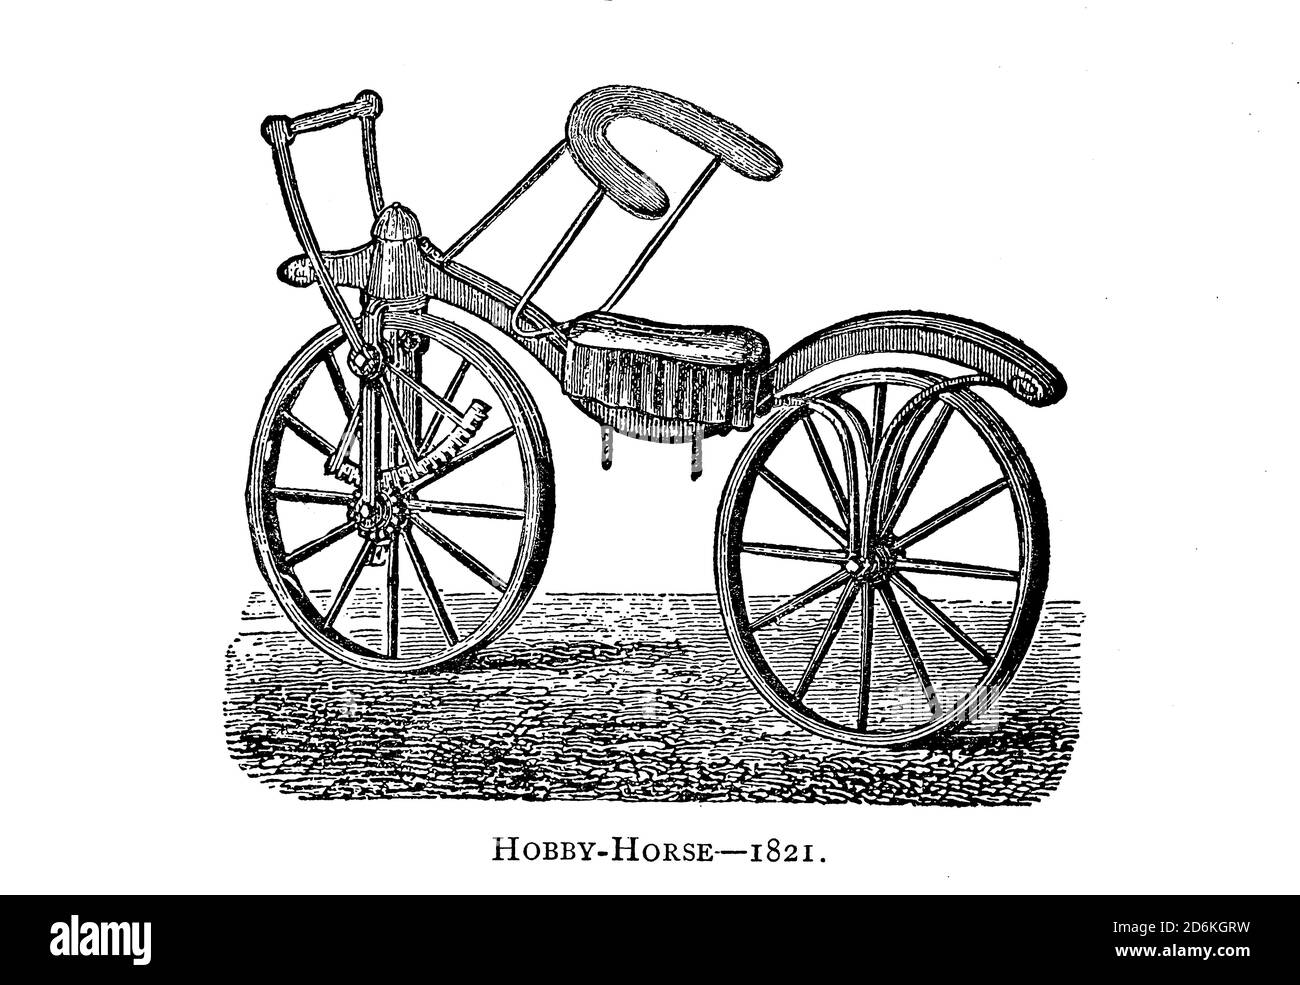 Lewis Gompertz's improvement on Baron von Drais's bicycle, 1821. 'The dandy ' or 'hobby horse' was the forerunner of the bicycle and was invented by Baron von Drais in France in 1817. It was introduced to England the following year by Denis Johnson, a coachmaker of Long Acre, London. Dandy horses had no pedals or brakes, but were propelled by the rider pushing on the ground with his feet, and dragging the feet to slow the machine. Gompertz improved on von Drais' design by adding a rack-and-pinion to power the front wheel. From Wheels and Wheeling; An indispensable handbook for cyclists, with o Stock Photo